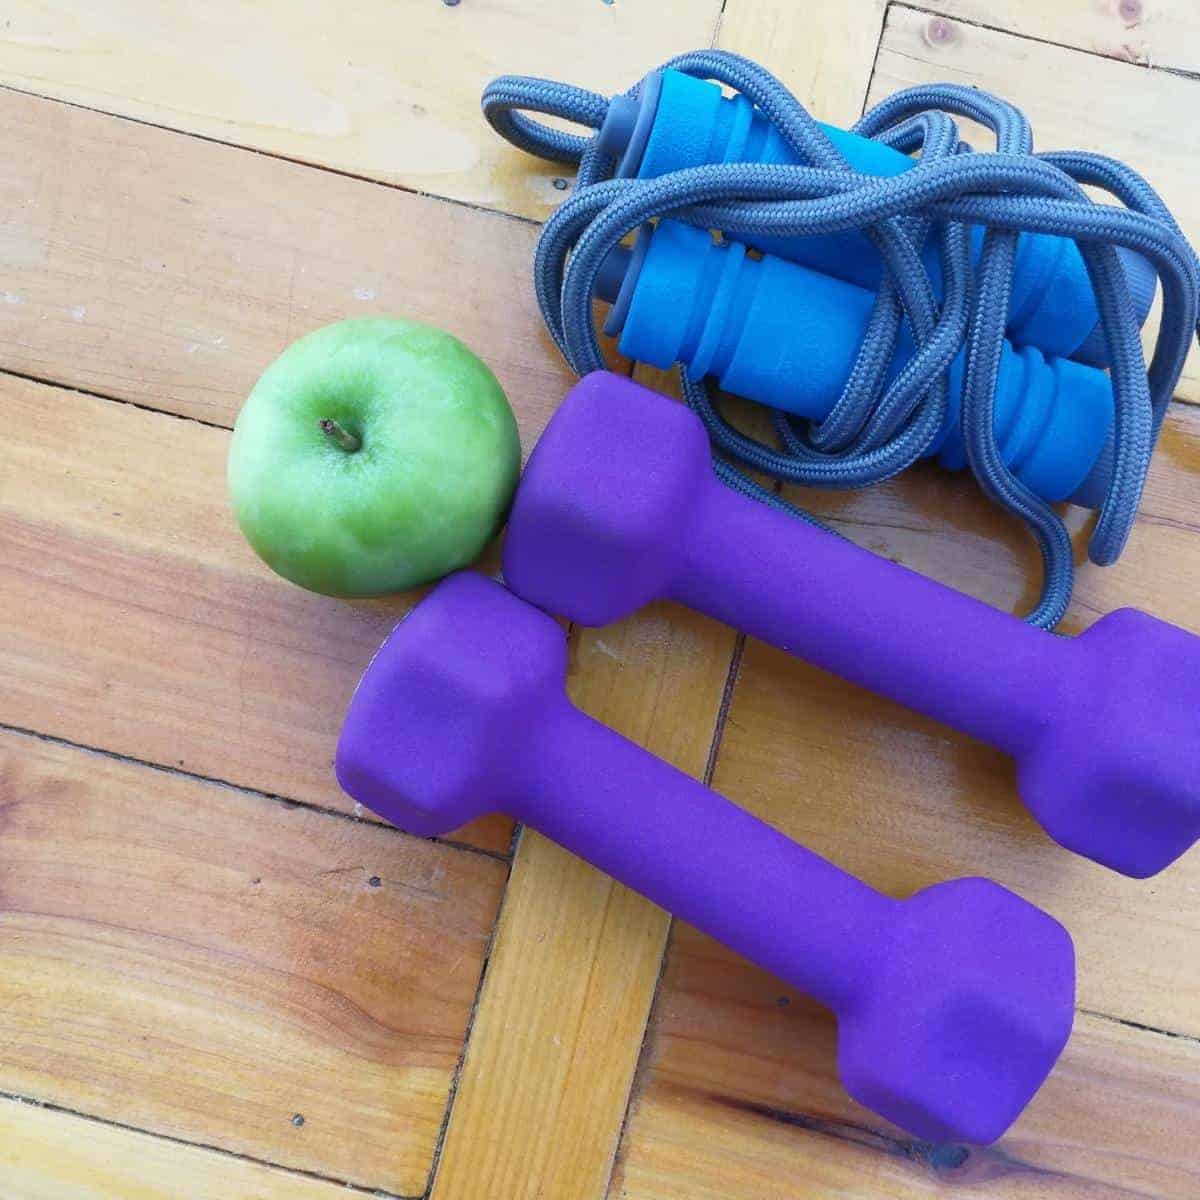 How to choose the best home workout equipment on a budget